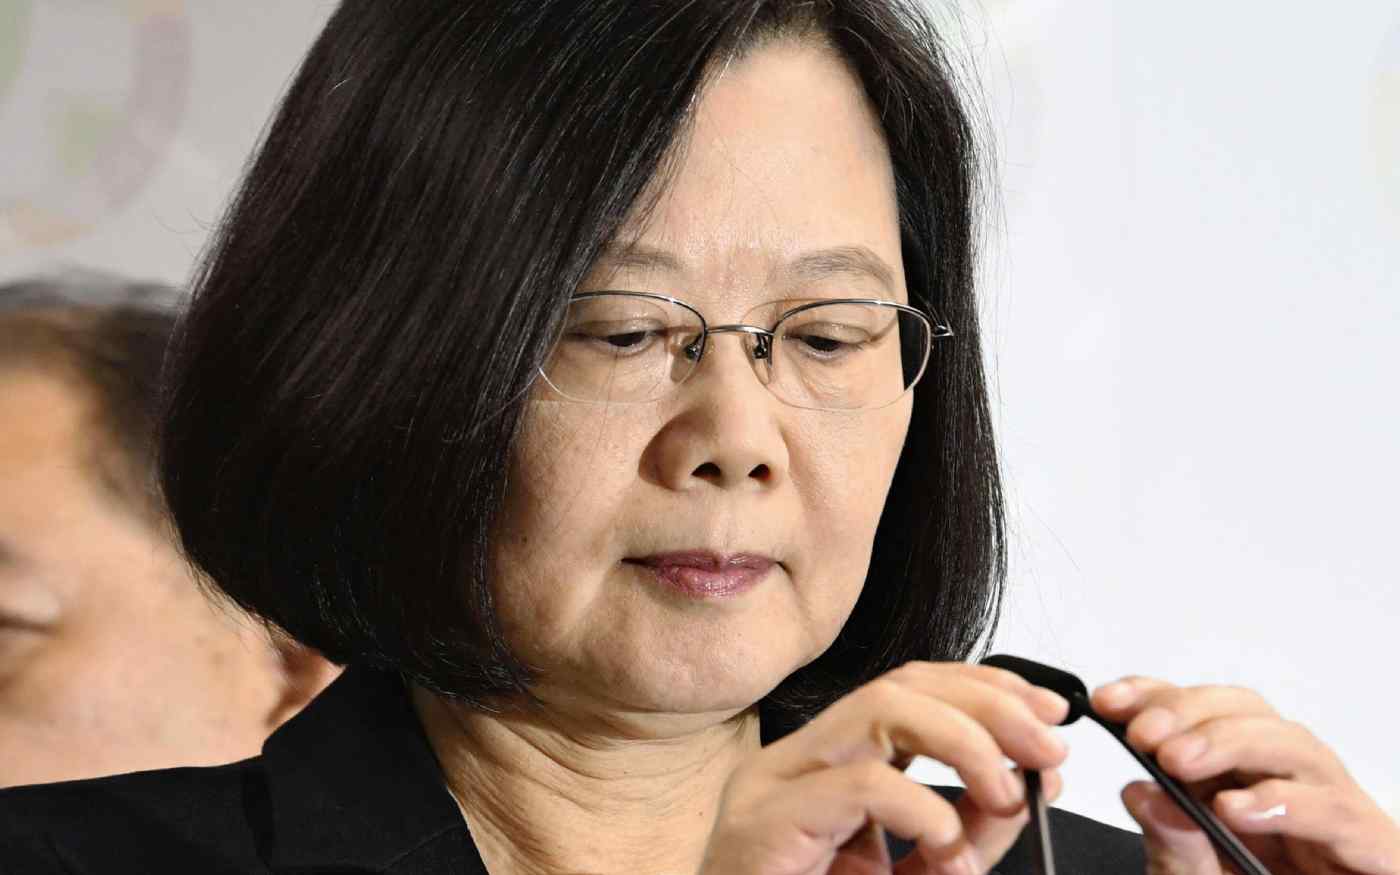 The party of Taiwanese President Tsai Ing-wen lost a number of local seats in Saturday's elections to the pro-China opposition.